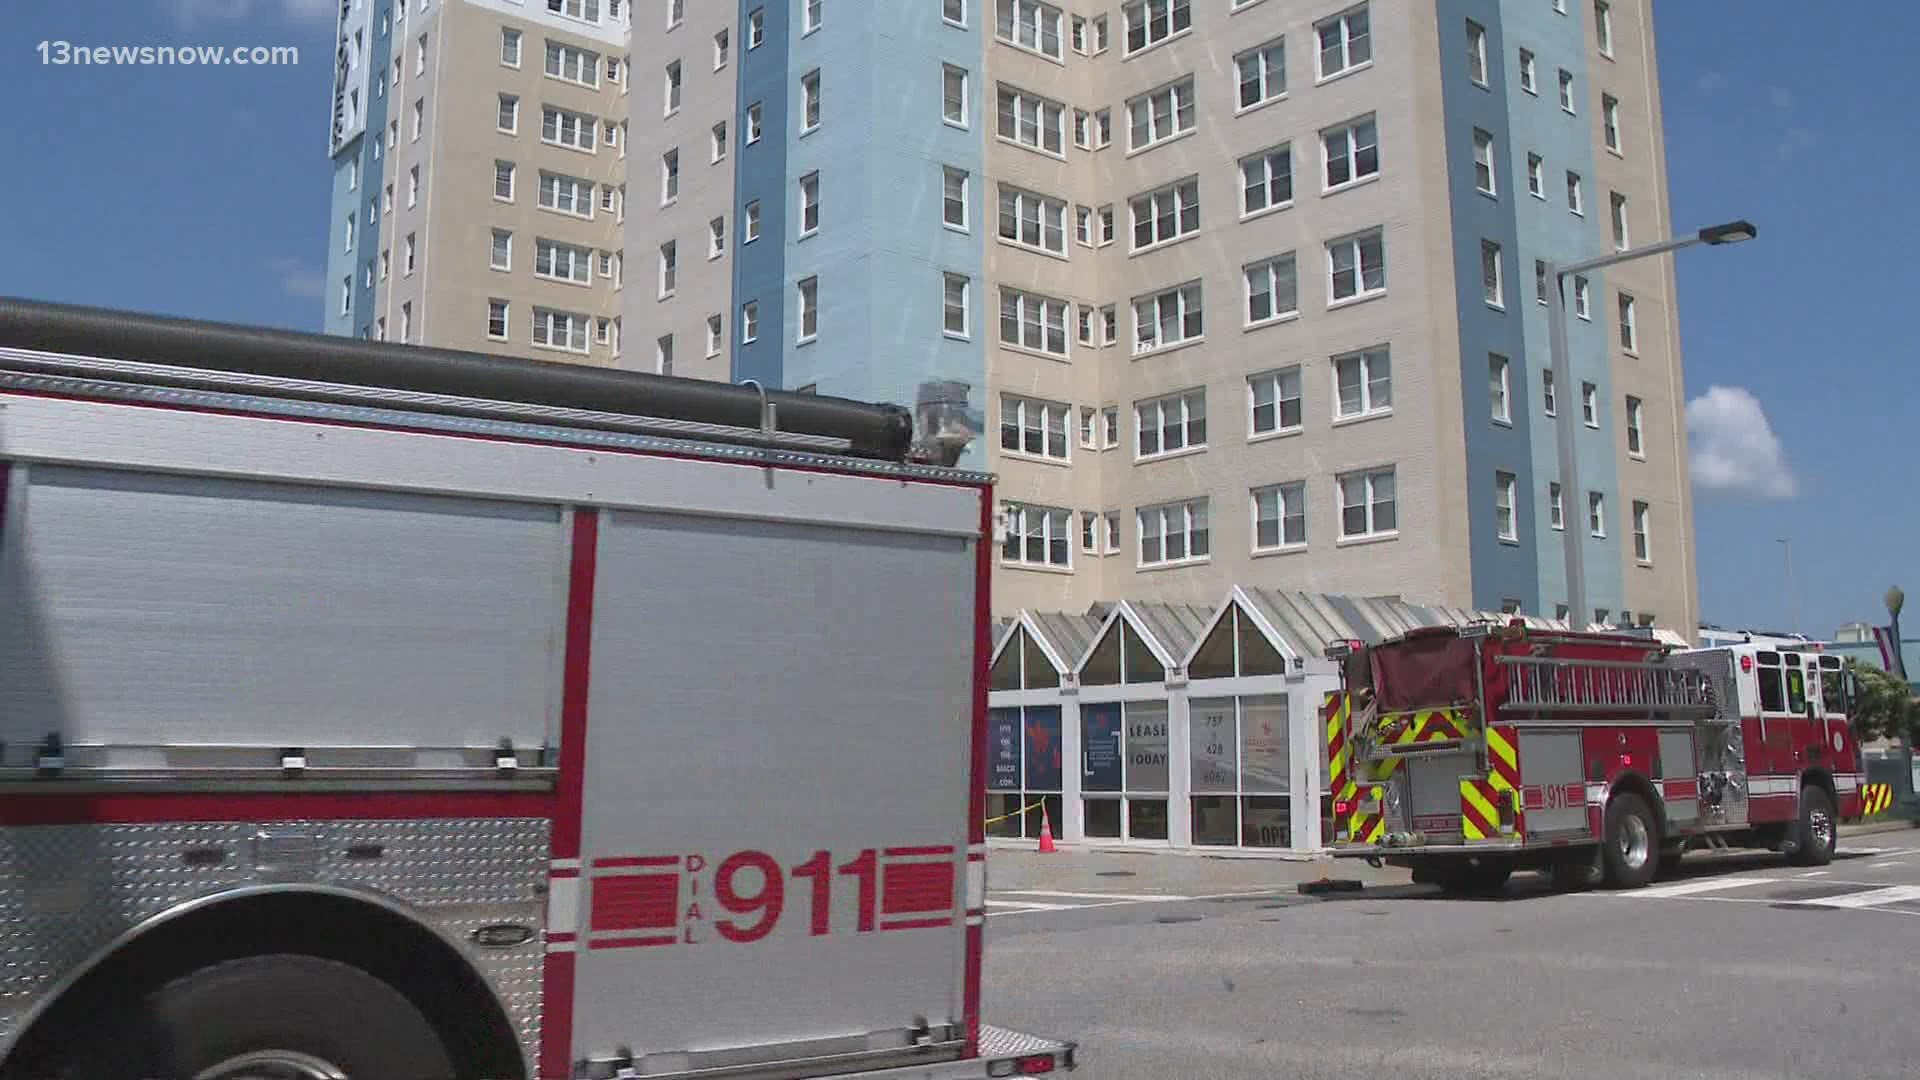 Firefighters said the fire broke out on the 15th floor of a high-rise located on 34th Street and Pacific Avenue. No one was injured.